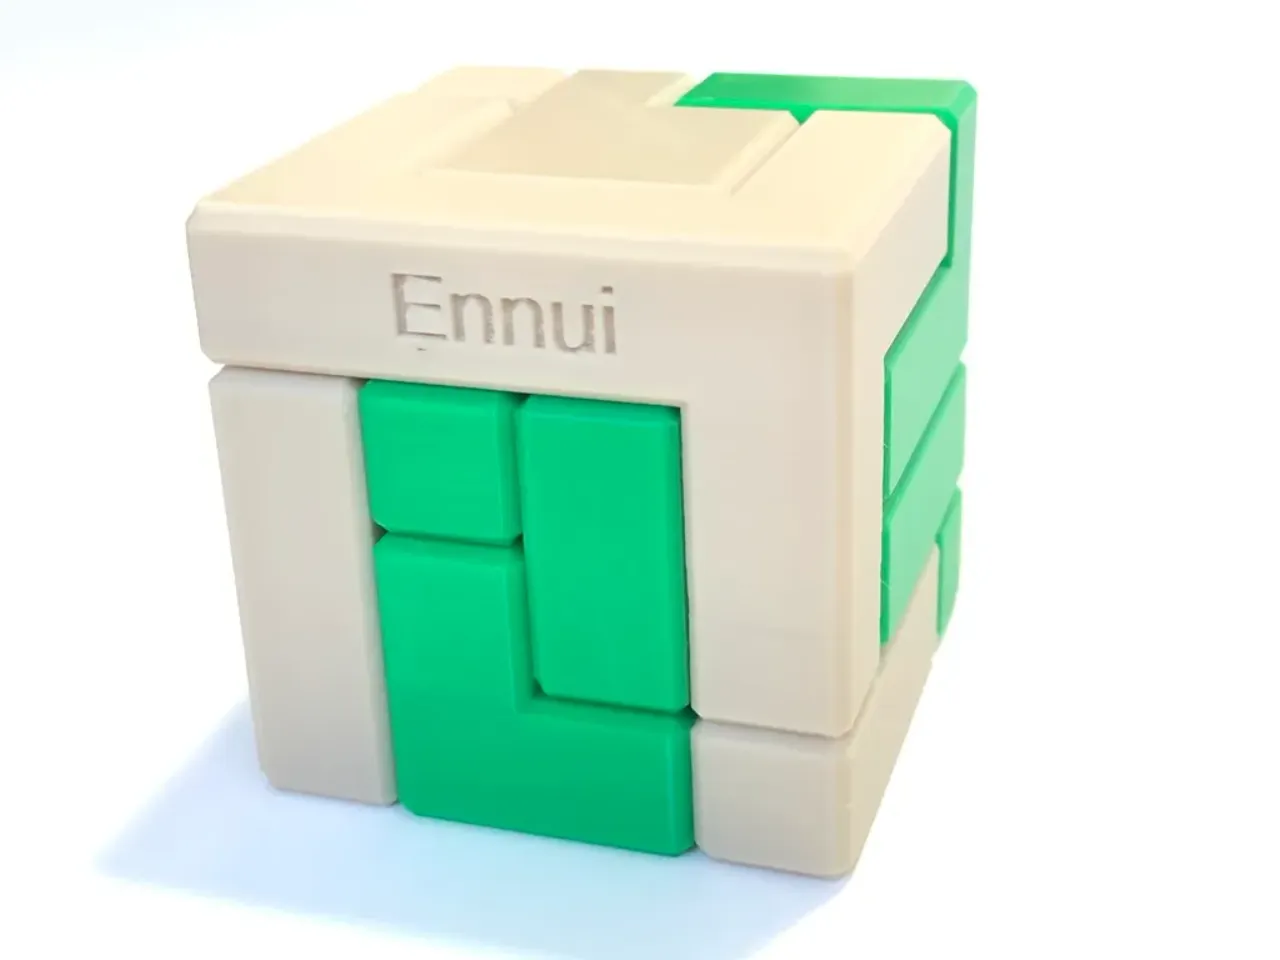 Ennui - Interlocking puzzle by László Molnár by Printable Puzzle Project |  Download free STL model